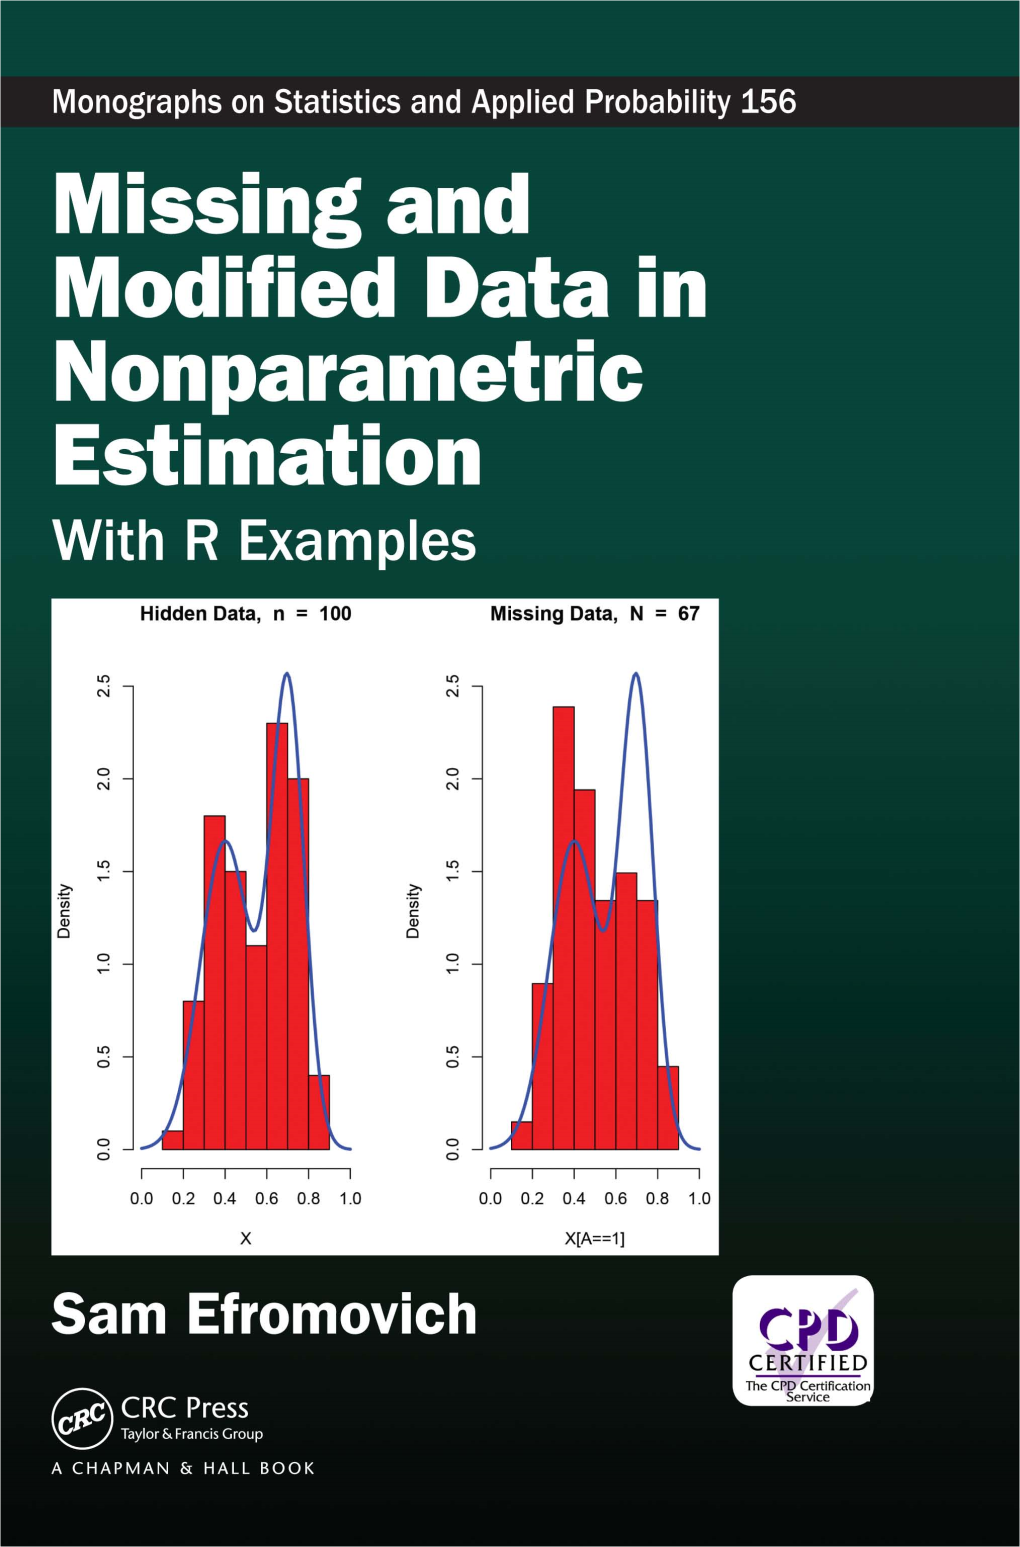 Missing and Modified Data in Nonparametric Estimation with R Examples MONOGRAPHS on STATISTICS and APPLIED PROBABILITY